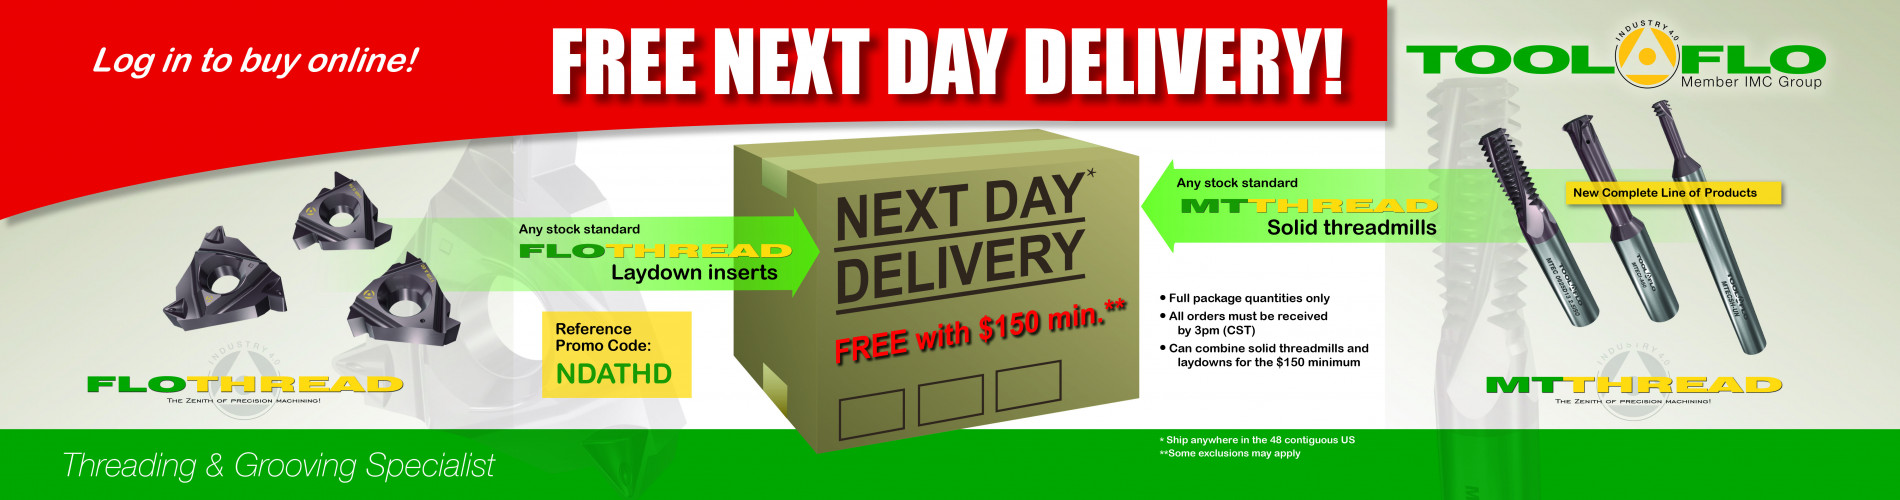 Banner-Free Next Day Delivery14